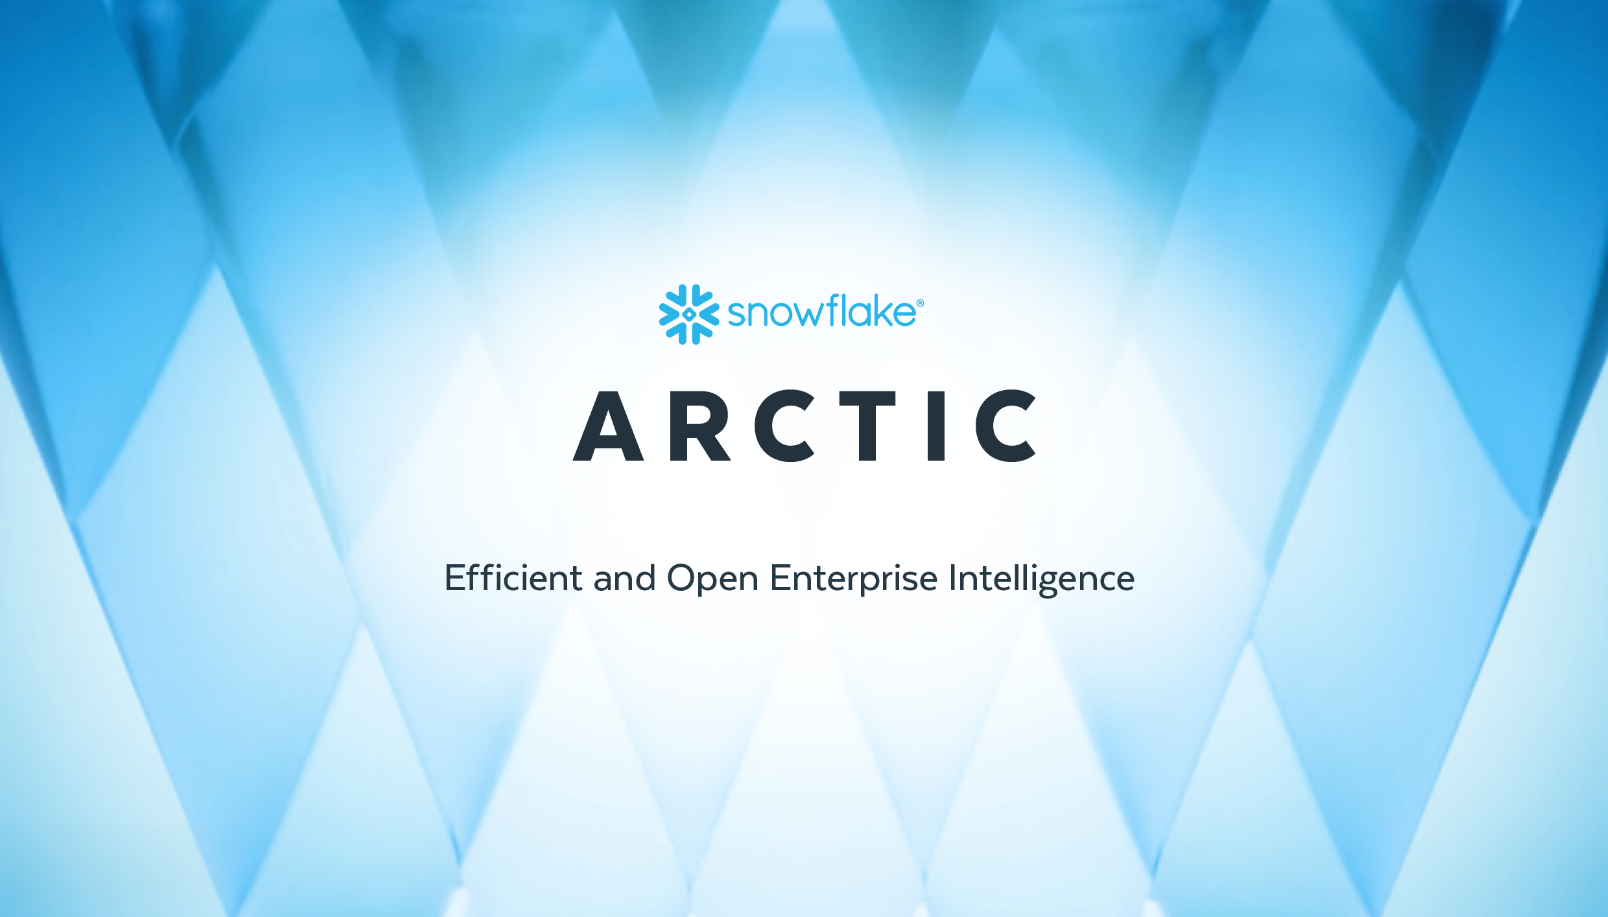 Snowflake's Arctic is the next open-source model focused on efficiency